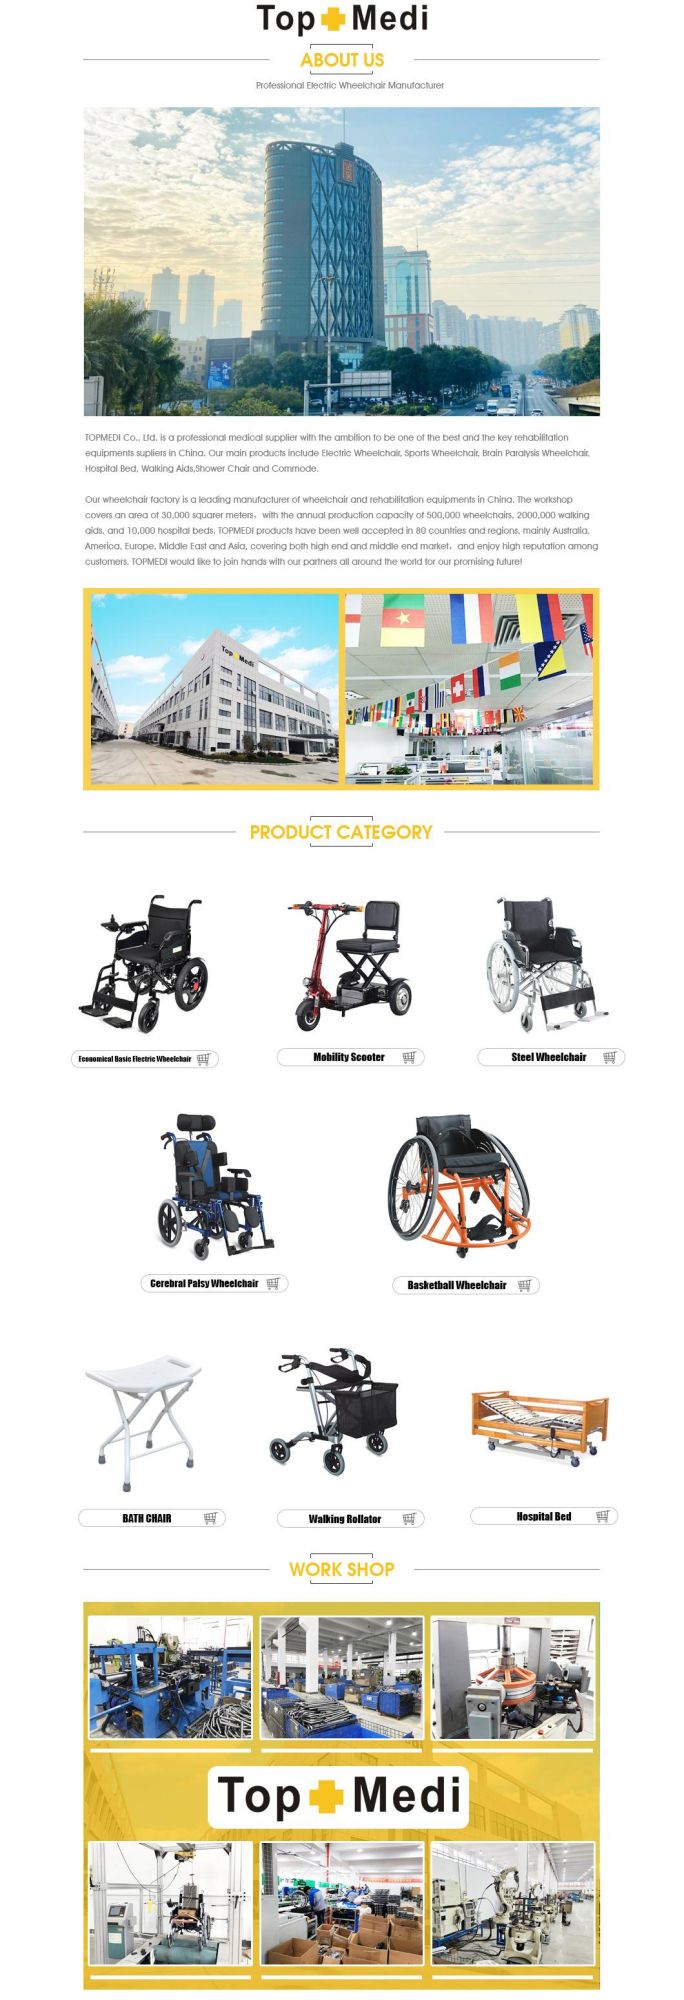 58cm Overall 44cm Seat Width Easy Folding Rollator Walker for Elderly and Disabled People